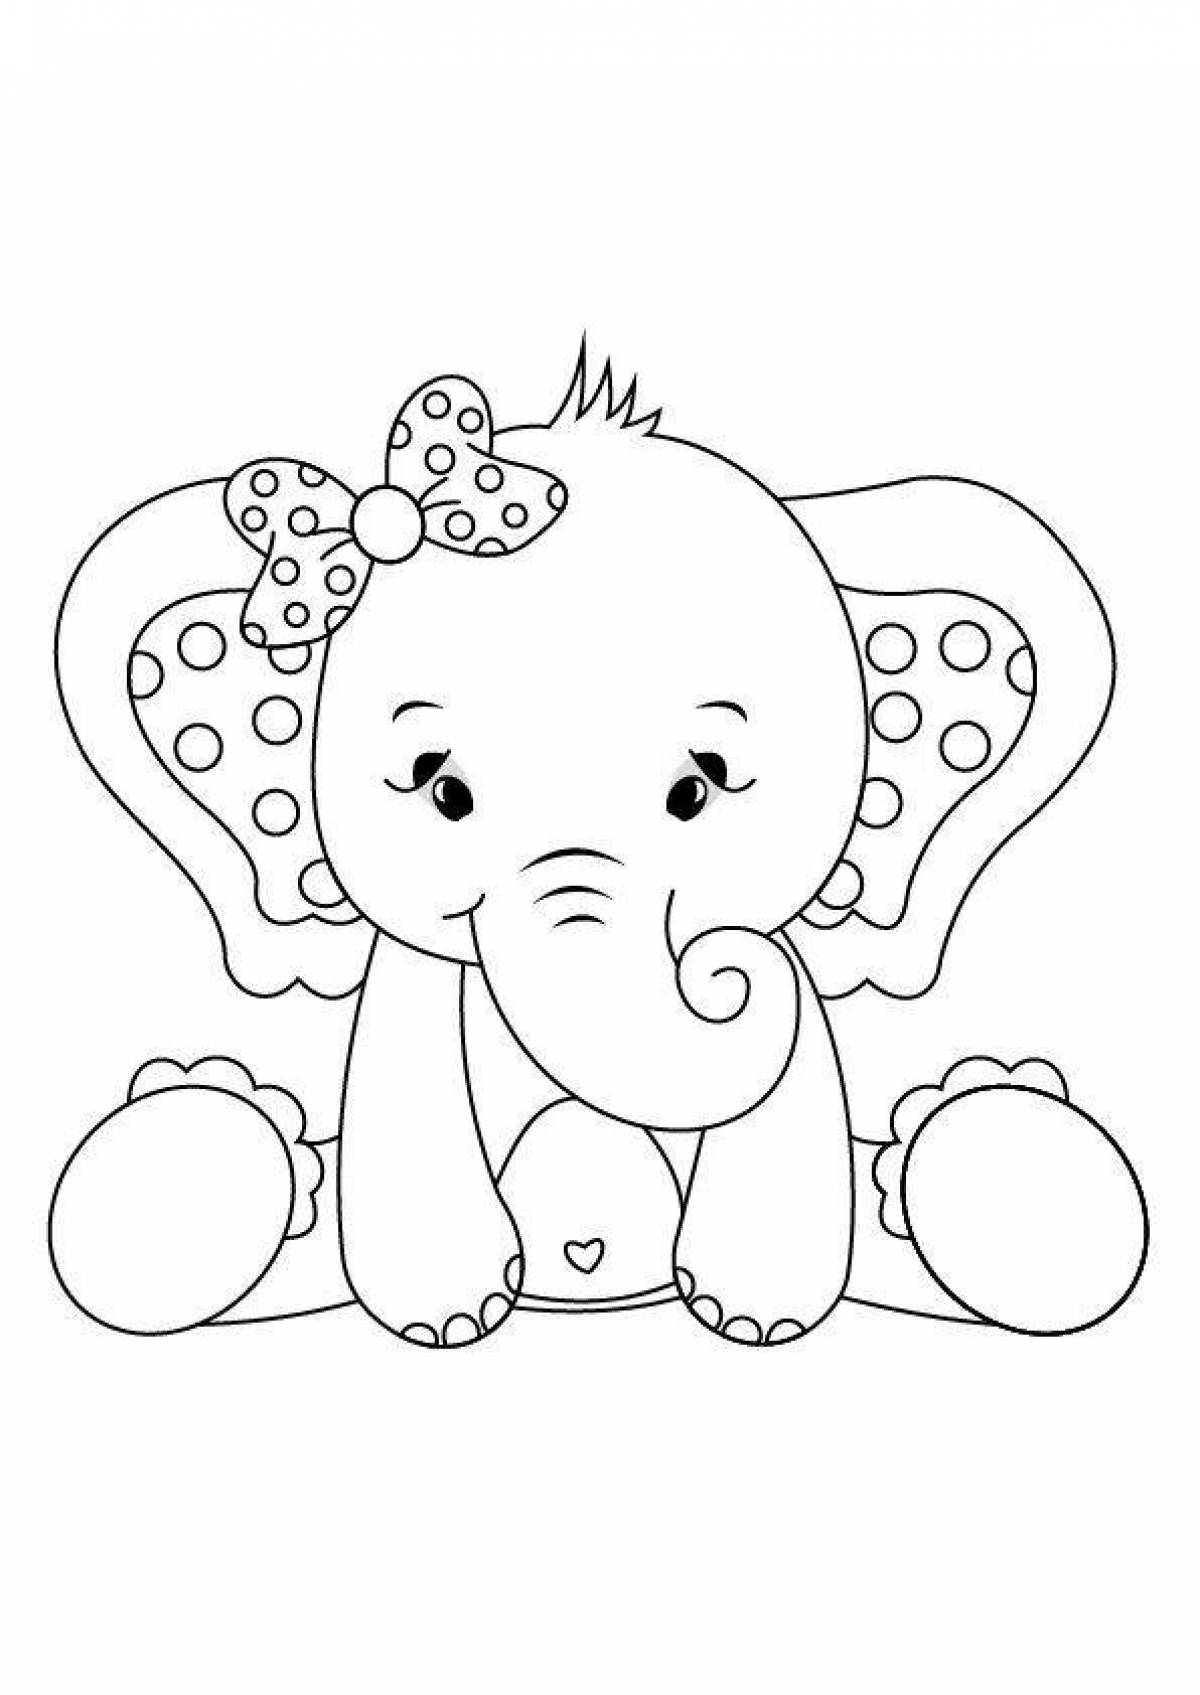 Fun elephant coloring for 3-4 year olds